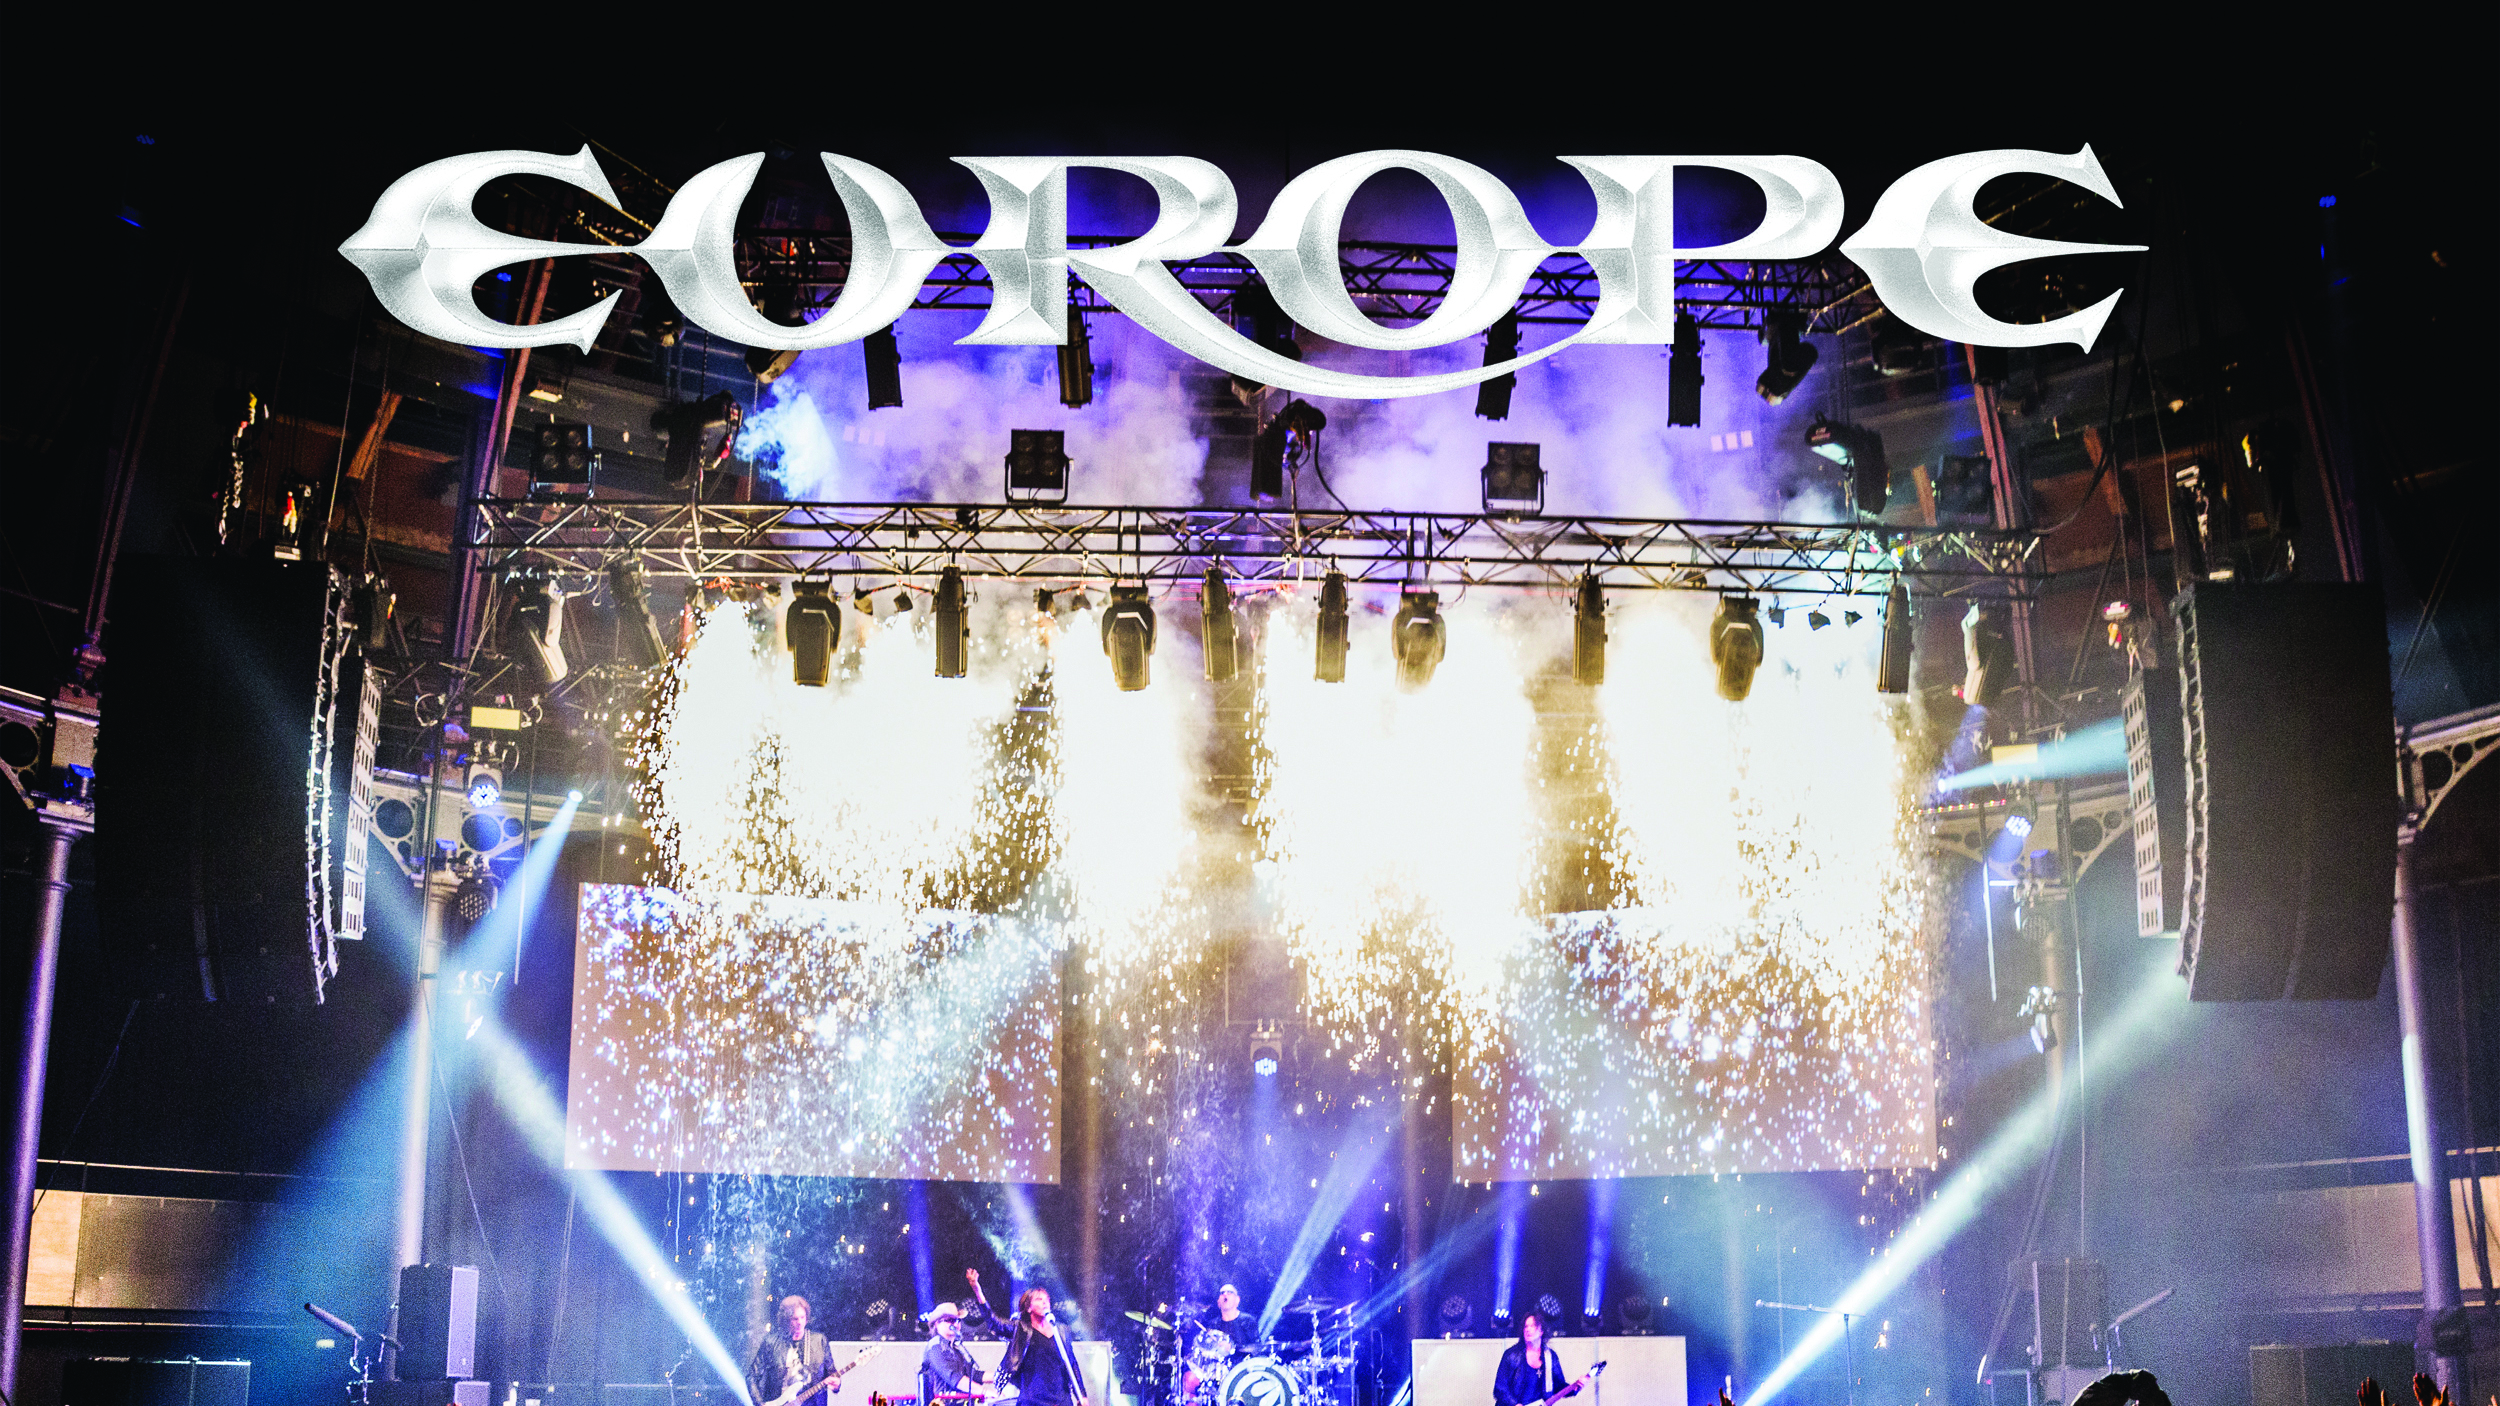 Europe, the Final Countdown 30th Anniversary Show: Live at the